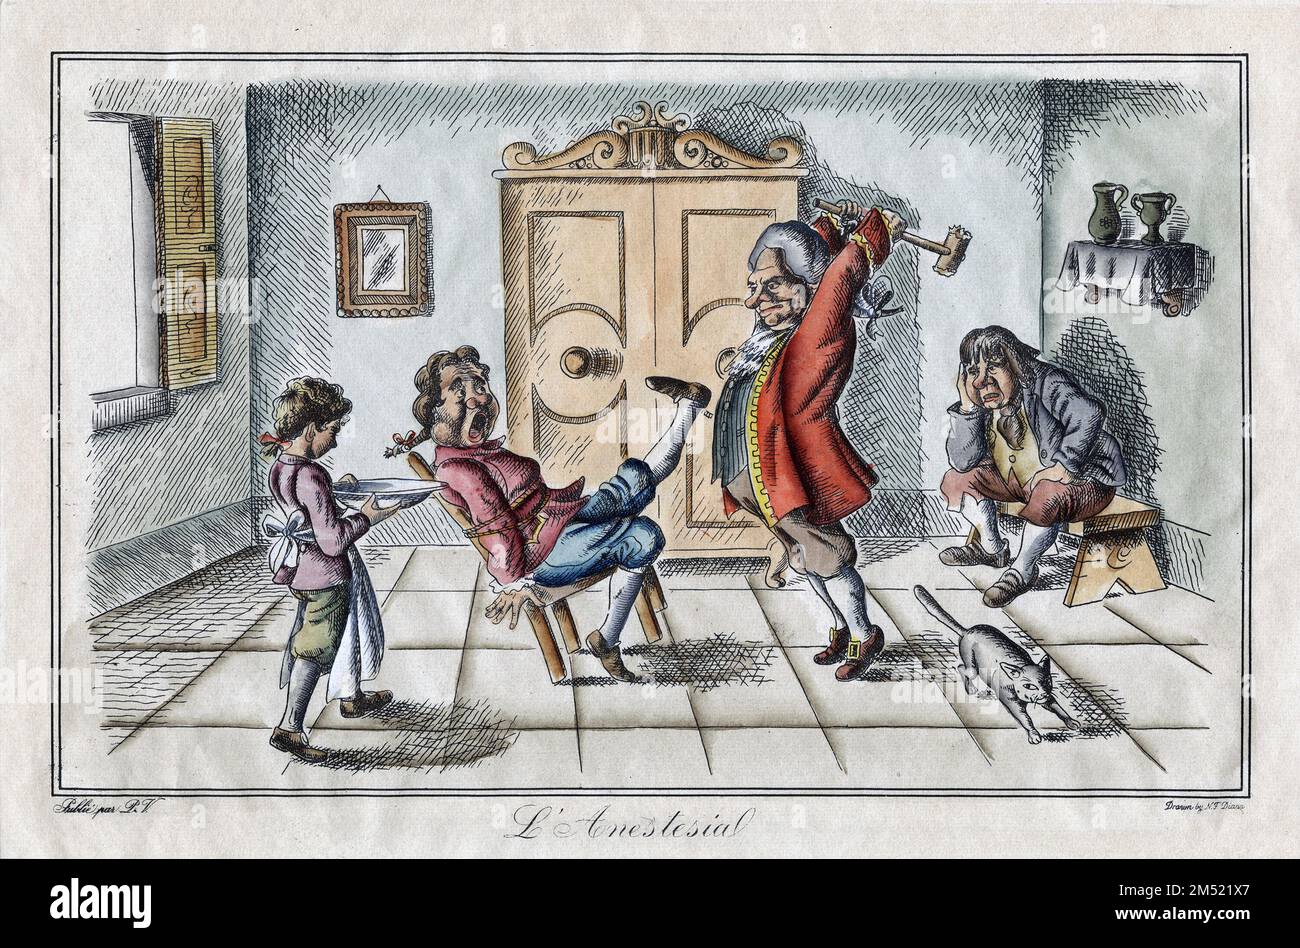 A dentist prepares his patient for a “painless” extraction with the help of a club in this comic illustration. Italian etching (possibly a reprint of an 18th century original). Stock Photo